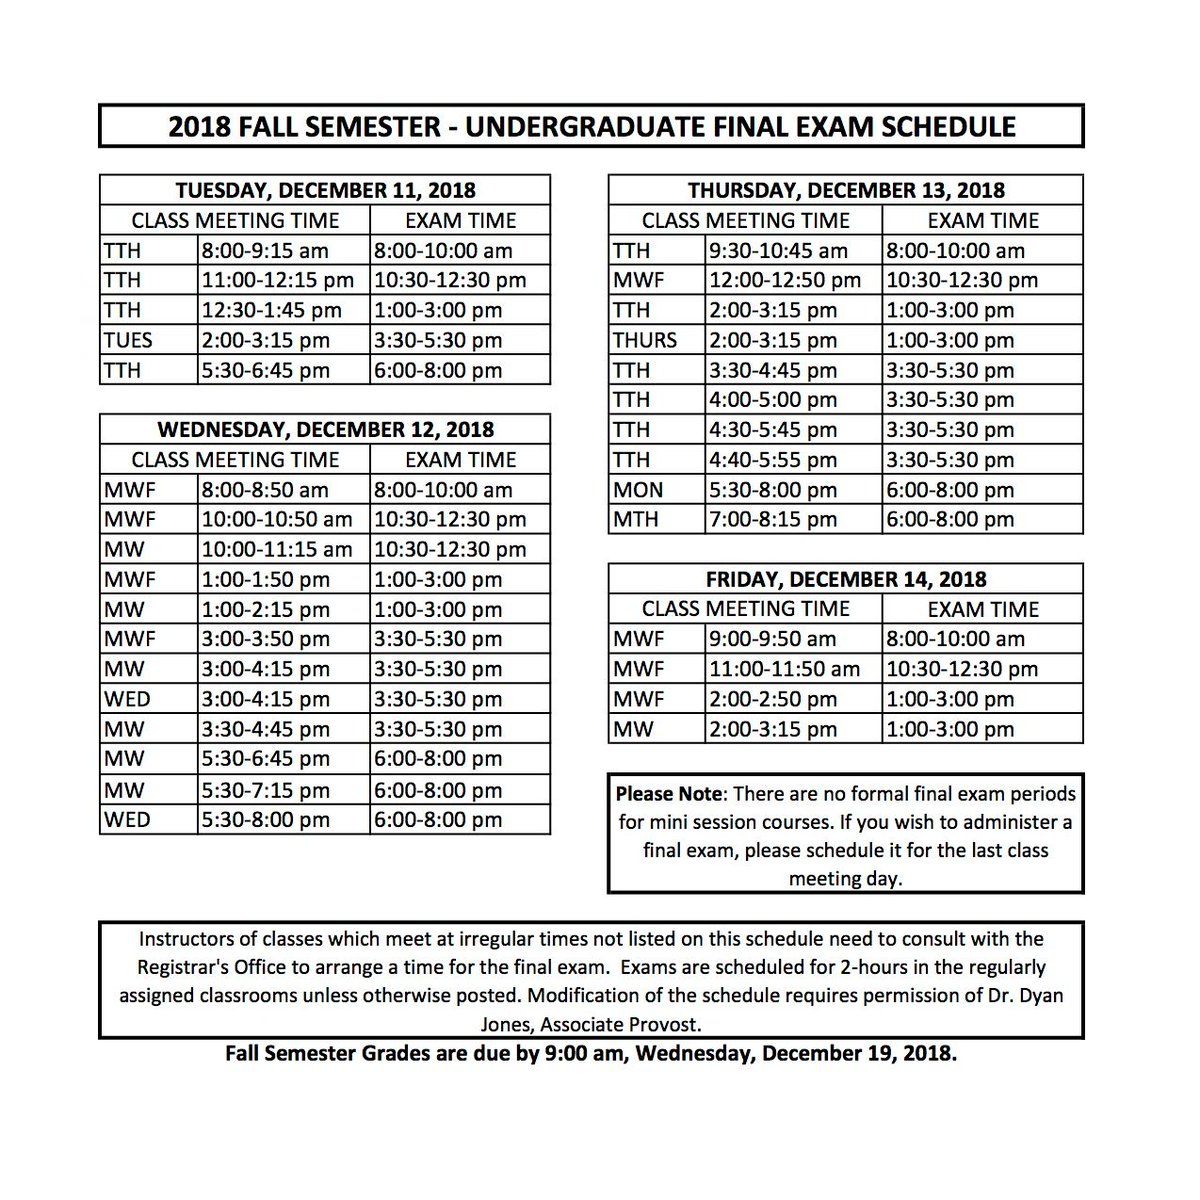 Mercyhurst Calendar 2022 Mercyhurst University On Twitter: "Unsure Of The Dates And Times Of Your  Finals? See Below! You Can Also View The Final Exam Schedule By Following  This Link: Https://T.co/Oxx0Xaz4Ps Https://T.co/Ulqlowyvvw" / Twitter